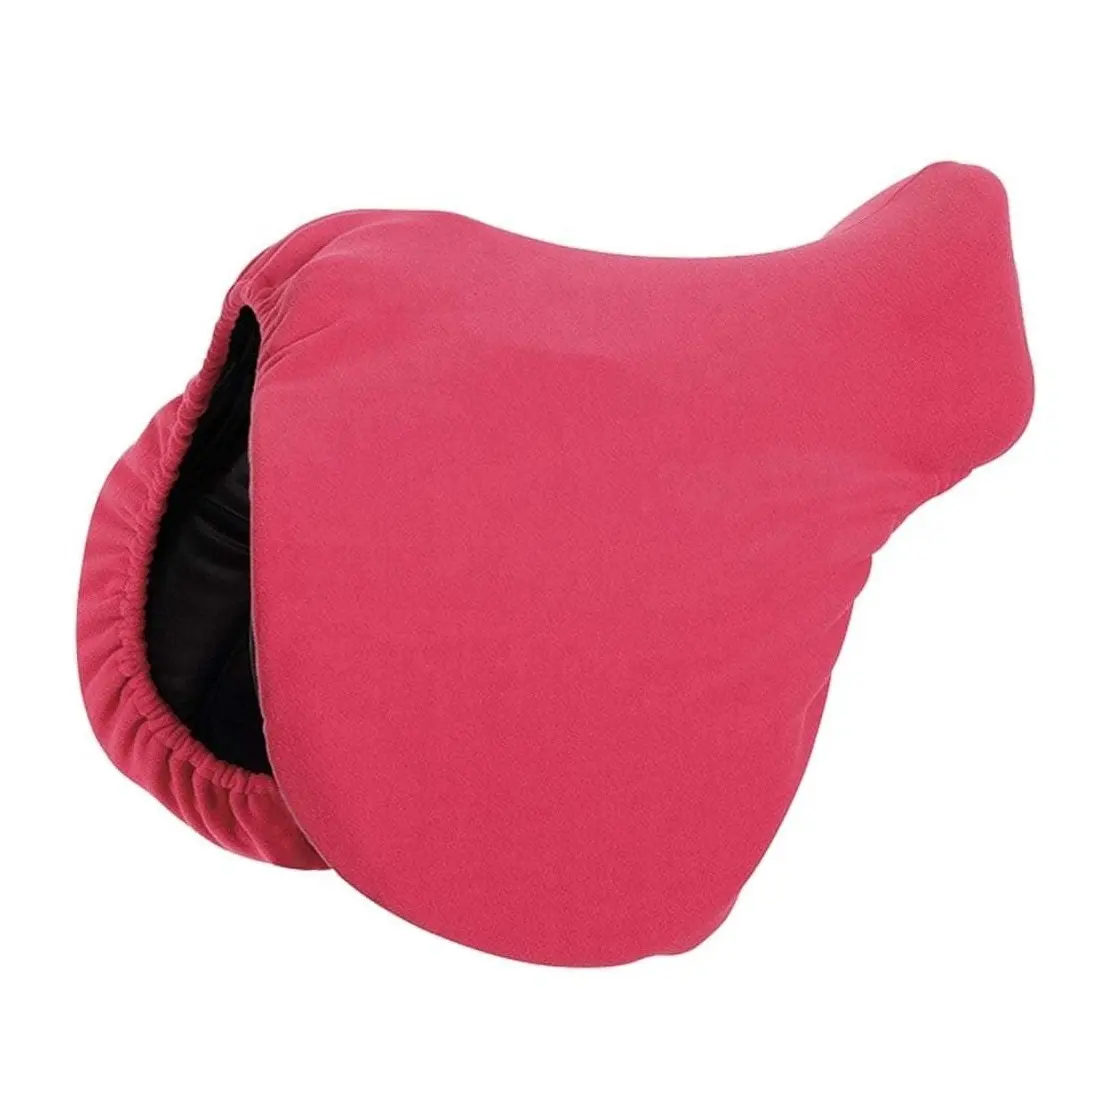 Genuine Equine Product Supplies Equestrian Horse saddle cover Top Trending Waterproof & Durable Horse Saddle Cover